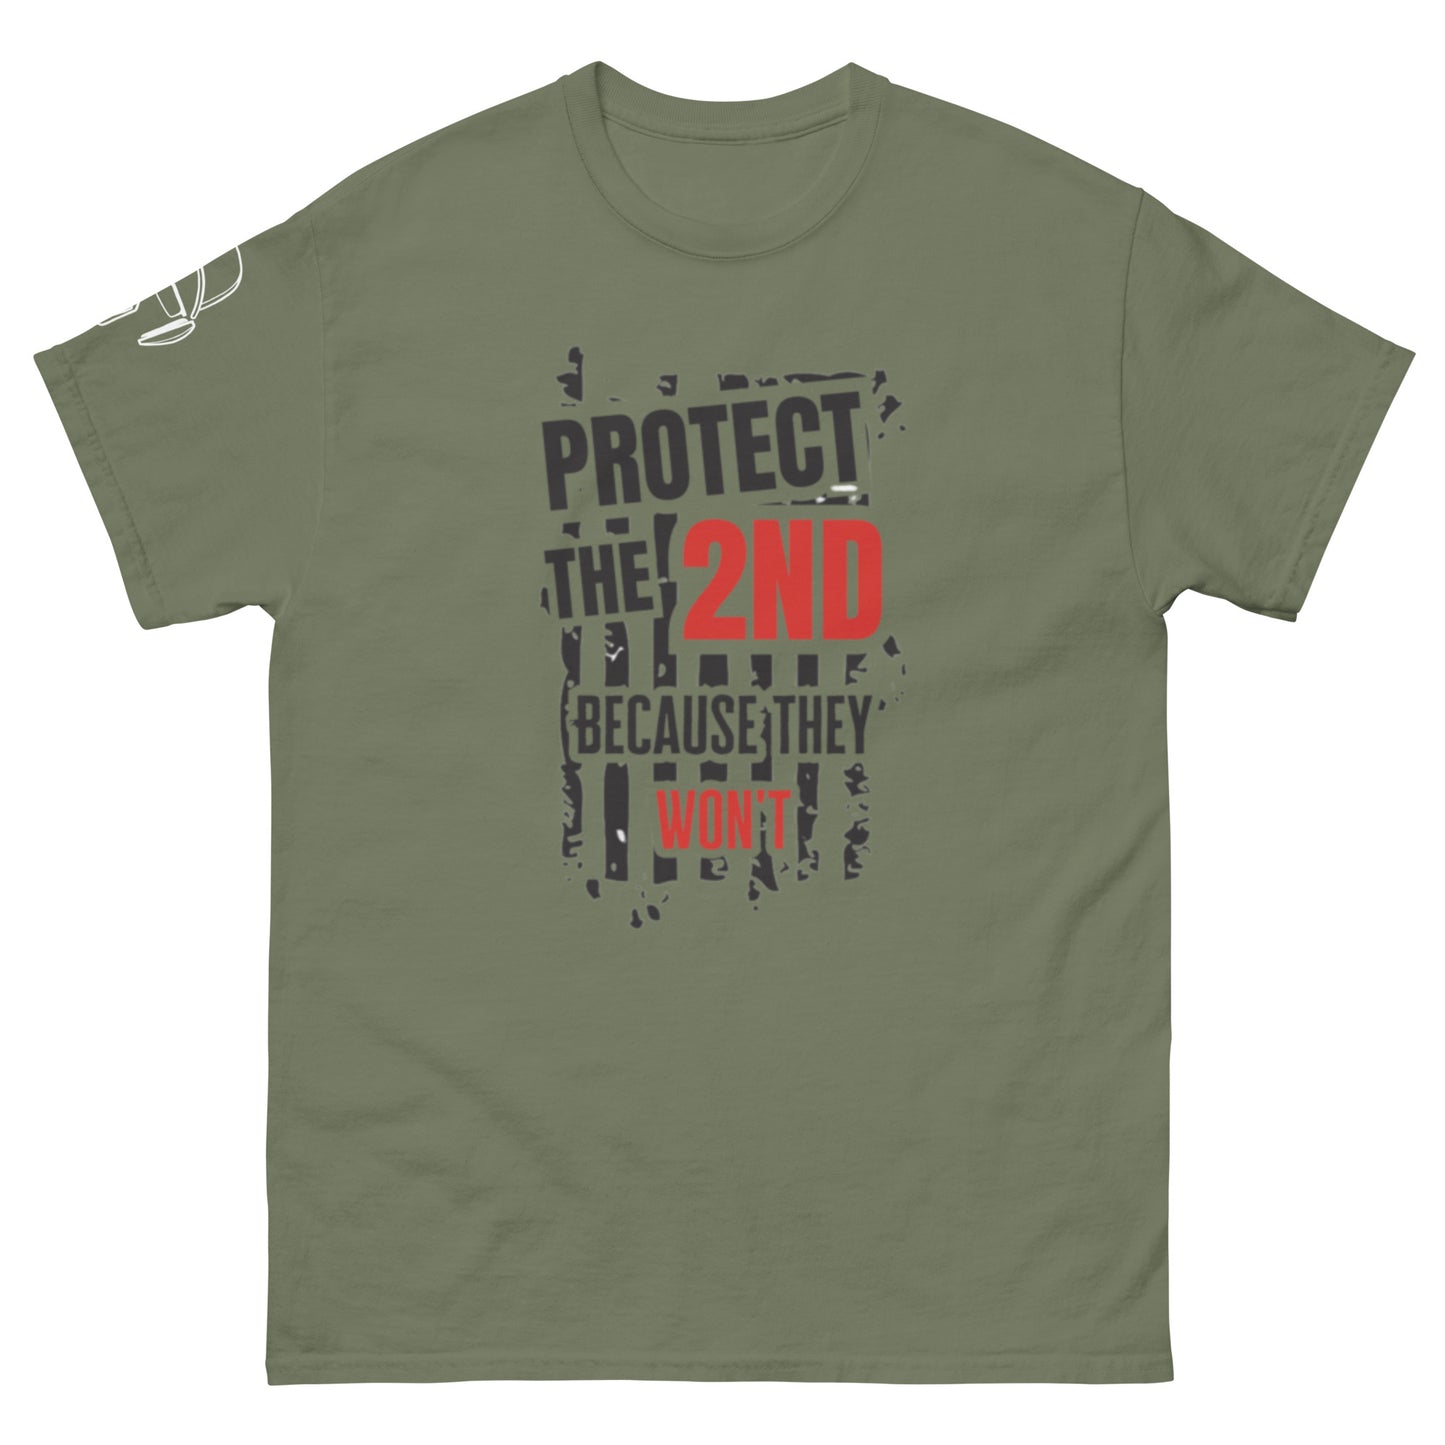 Men's classic tee Protect The 2nd